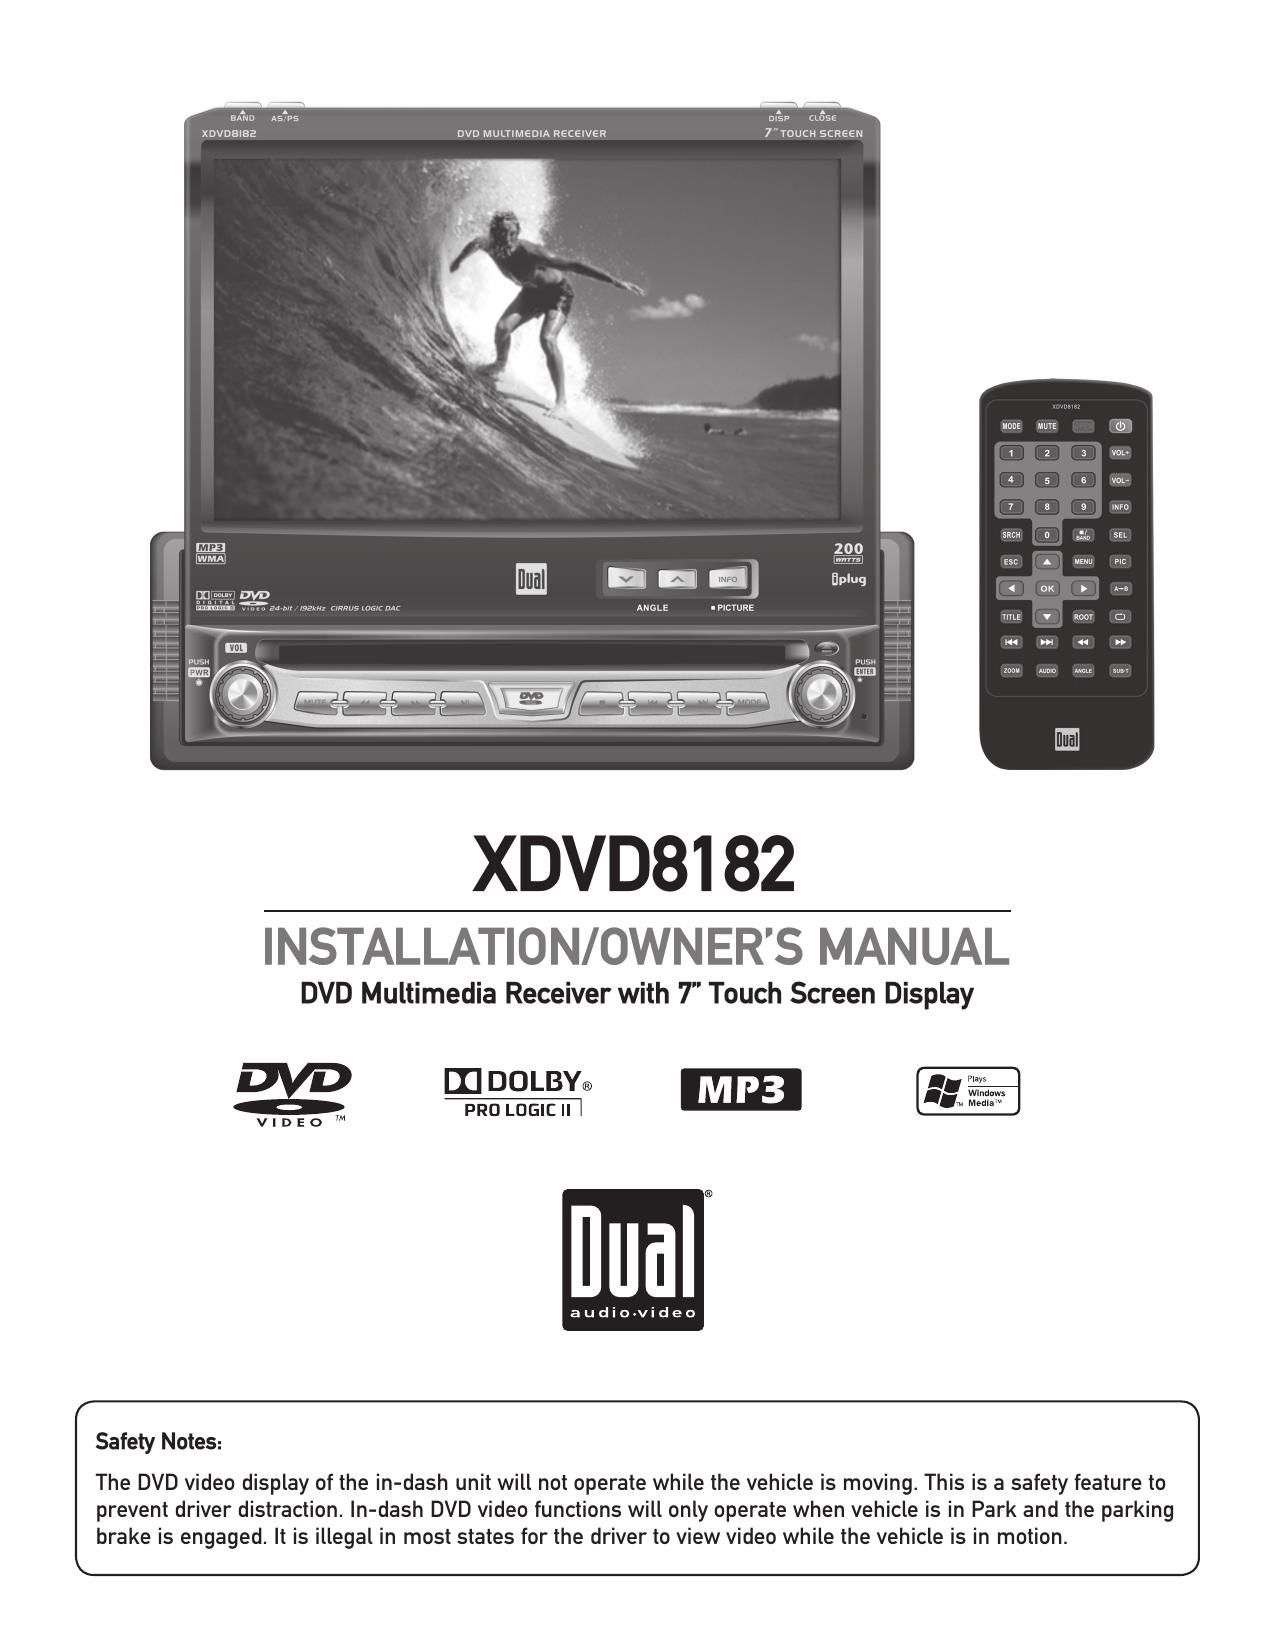 Dual XDVD 8182 Owners Manual